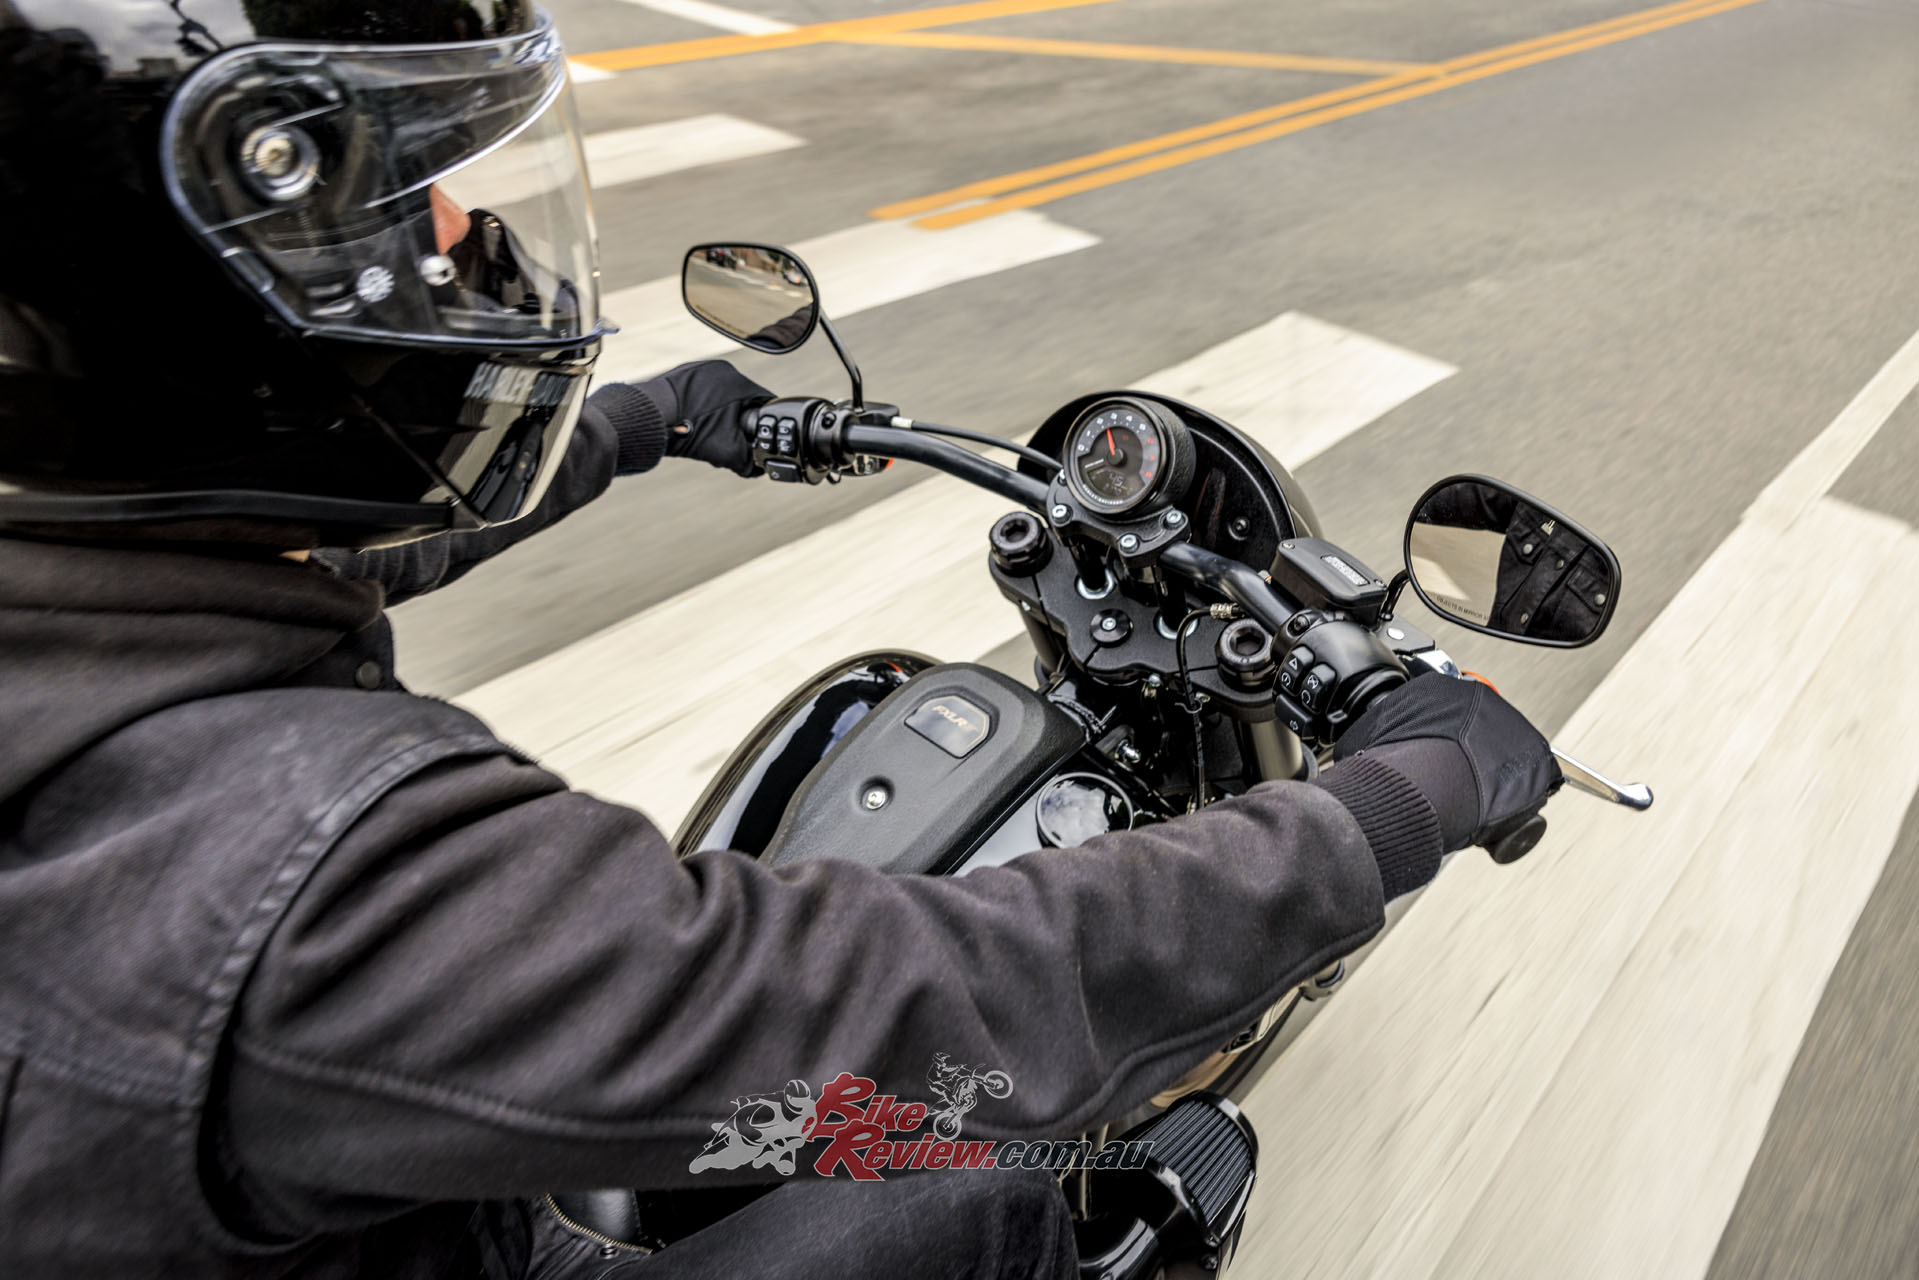 Instrumentation on the Lowrider models is presented by a compact digital display inset in the handlebar riser for a custom, “no gauges” look. This cleans up the whole look of the bike, streamlining the styling as a whole.